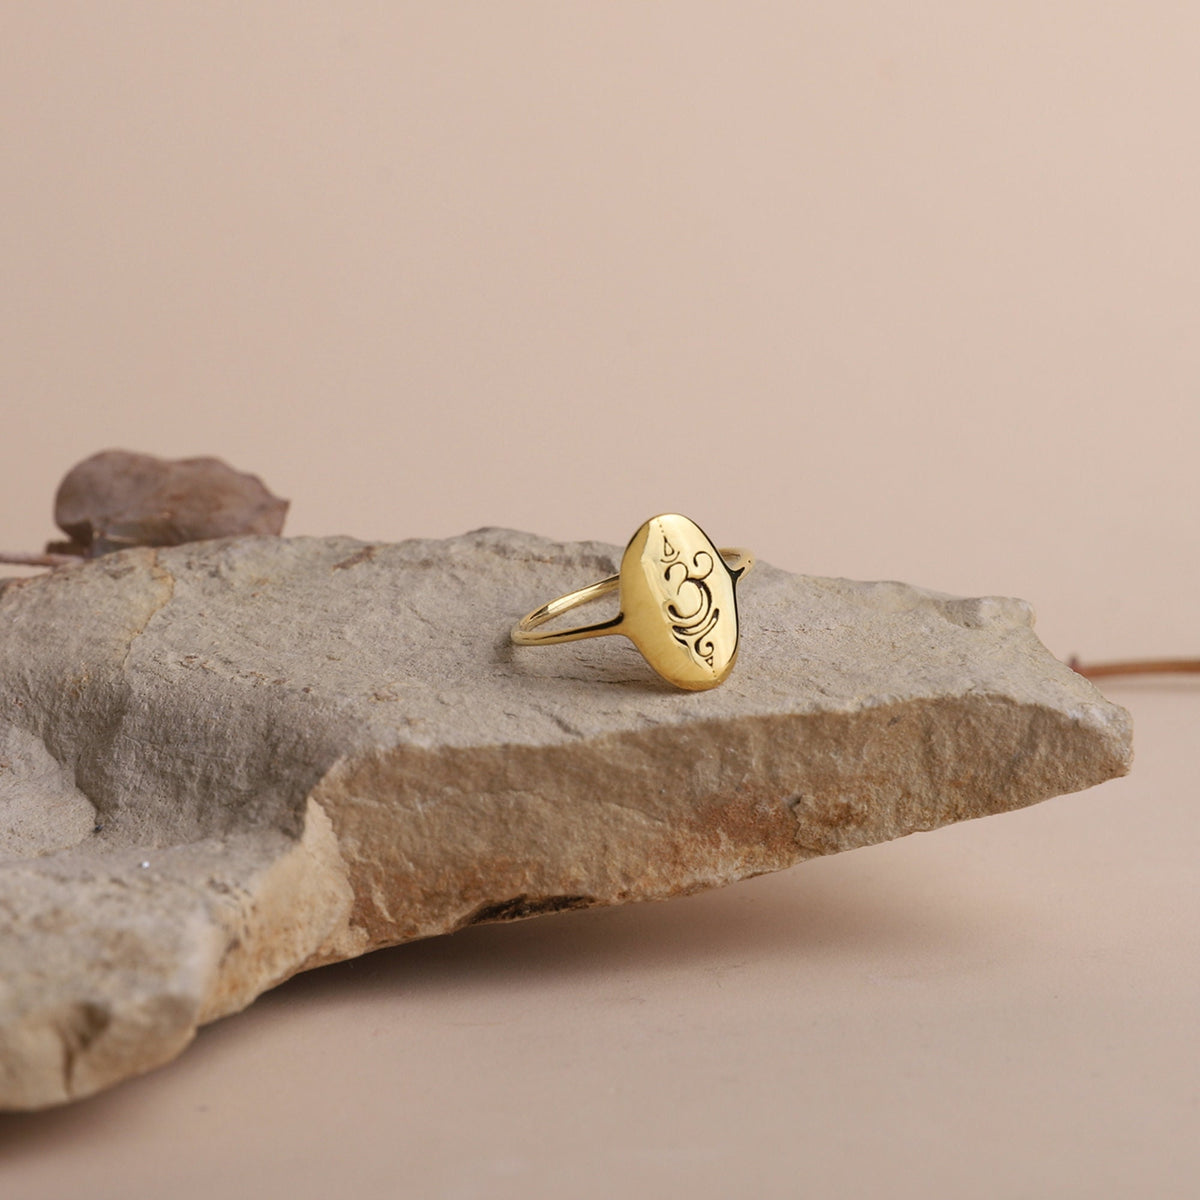 Cute Yoga Symbol Breathe Ring Gold, Sterling Silver Ohm Ring • Dainty Spiritual Ring • Gifts for Her